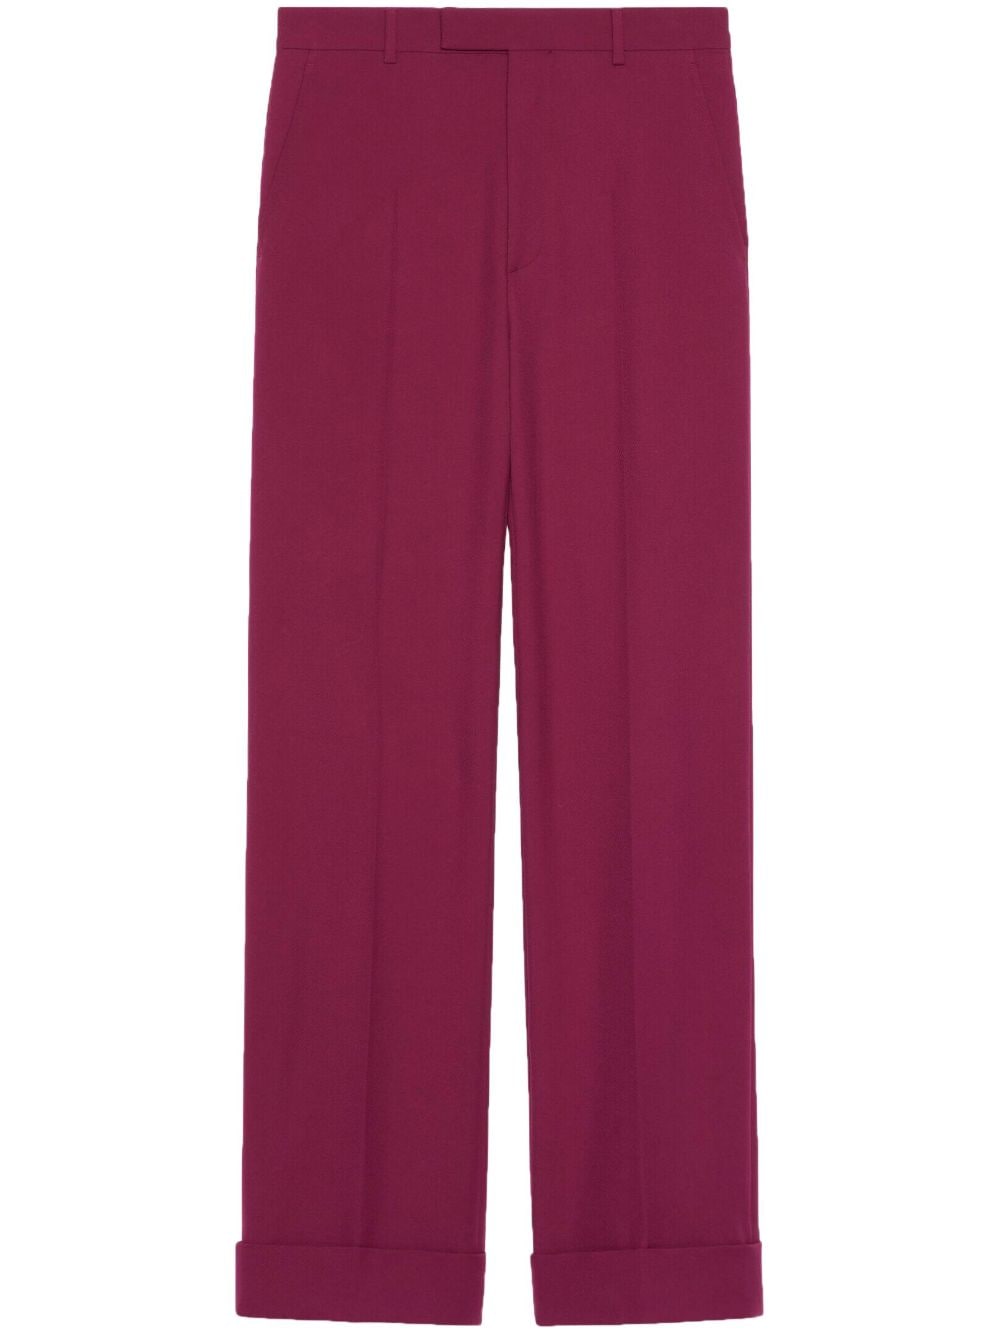 Gucci tailored wool trousers von Gucci